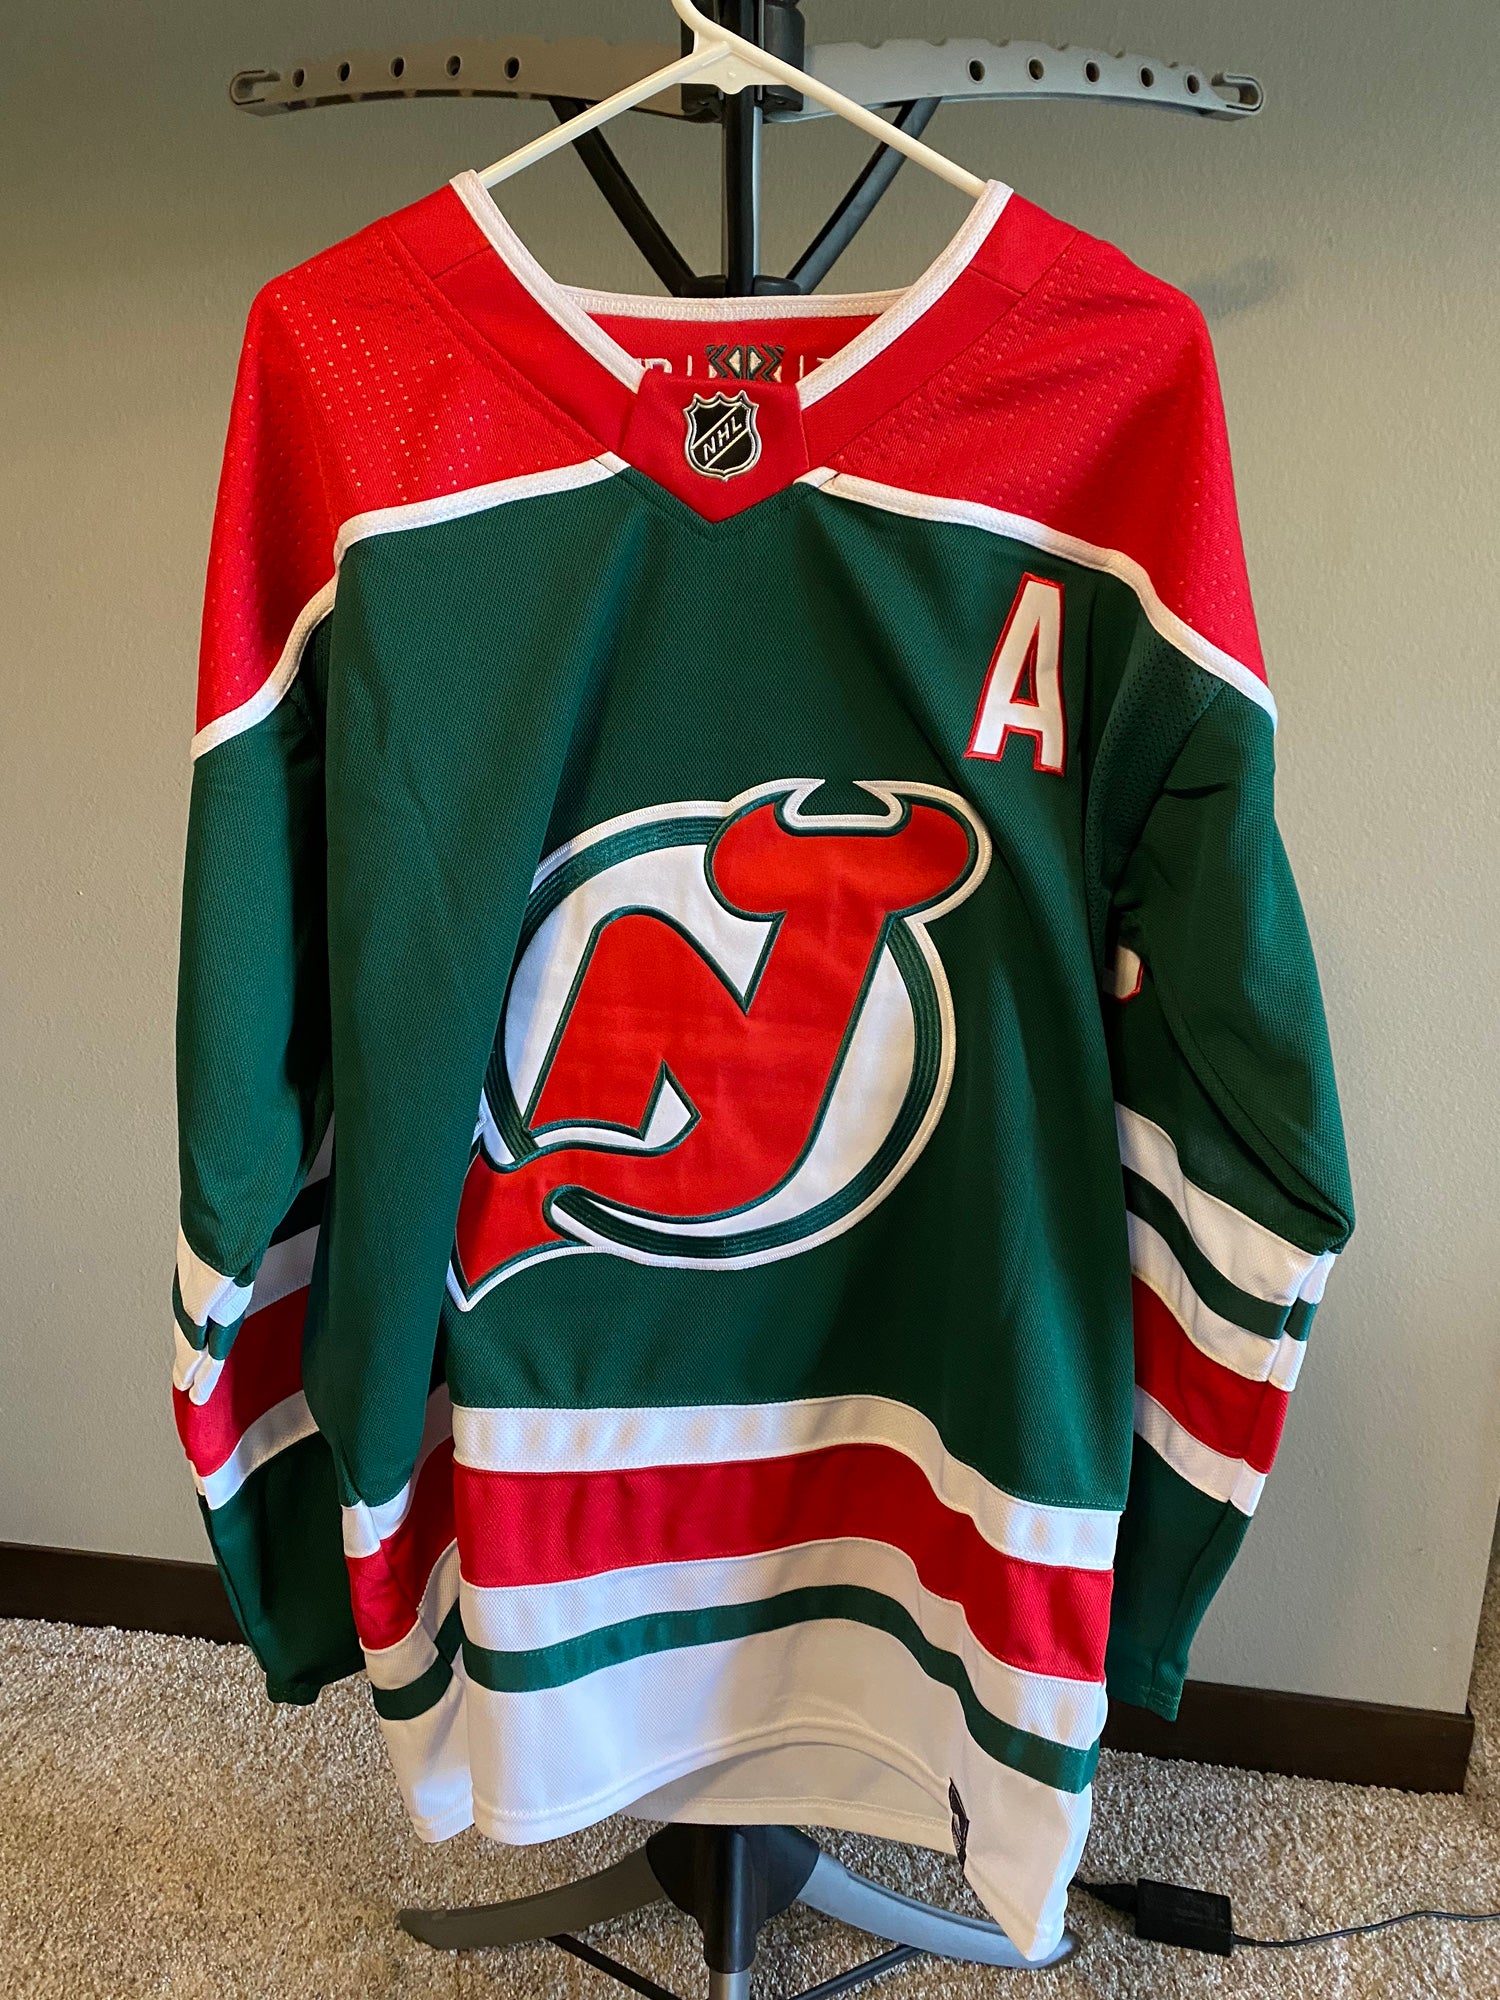 New Jersey Devils HUGHES Size 54 Adult Unisex Adidas Jersey